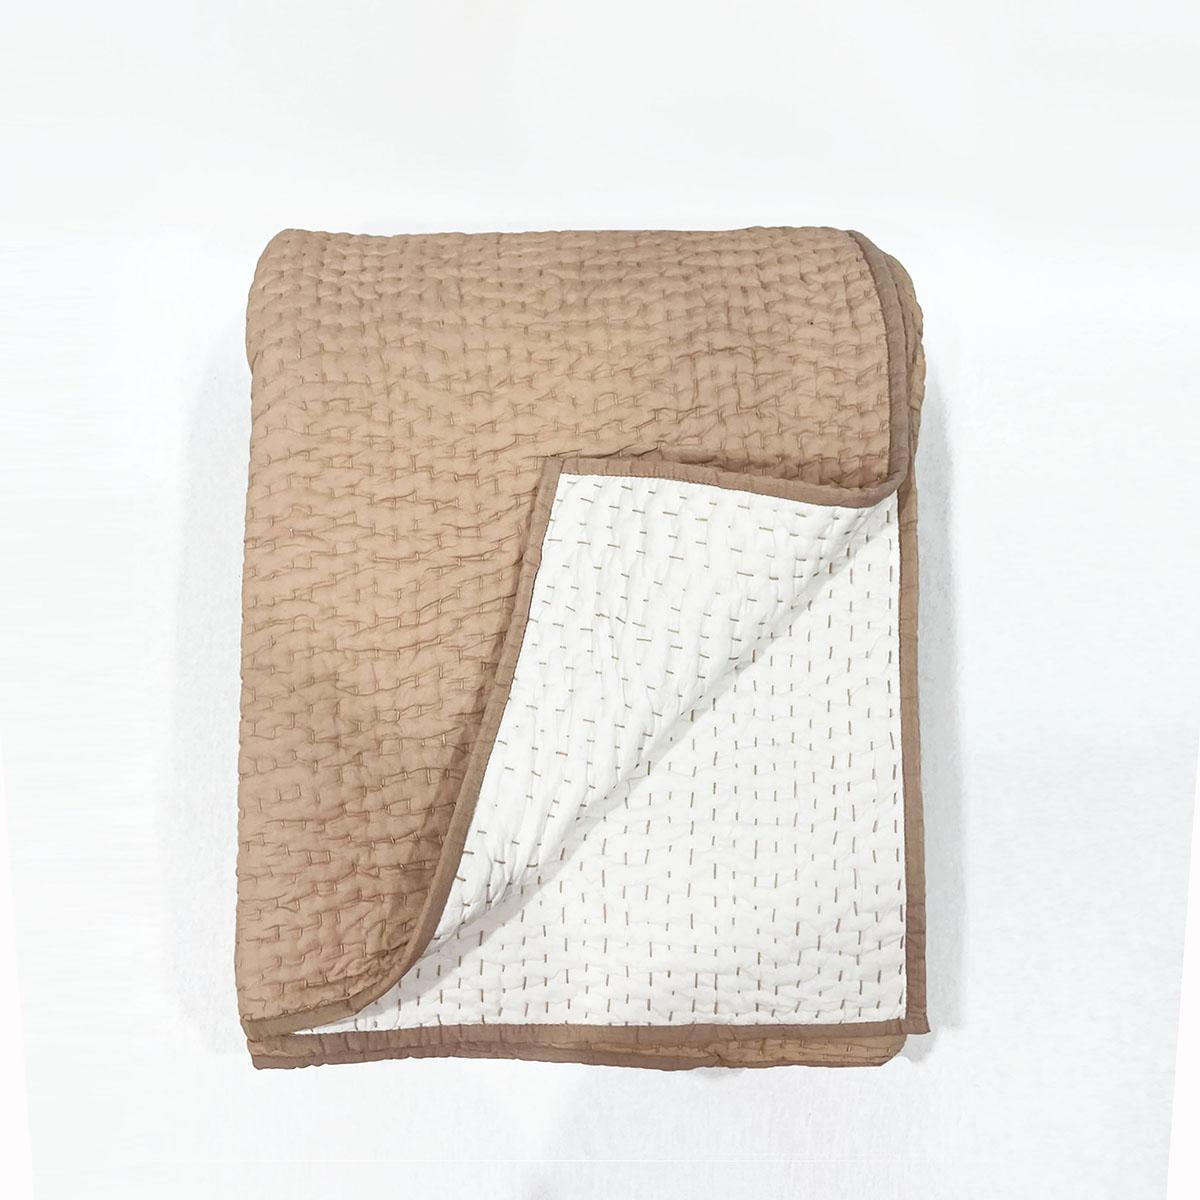 FAWN / BEIGE colour kantha Quilt and coordinated pillow cases, Sizes available